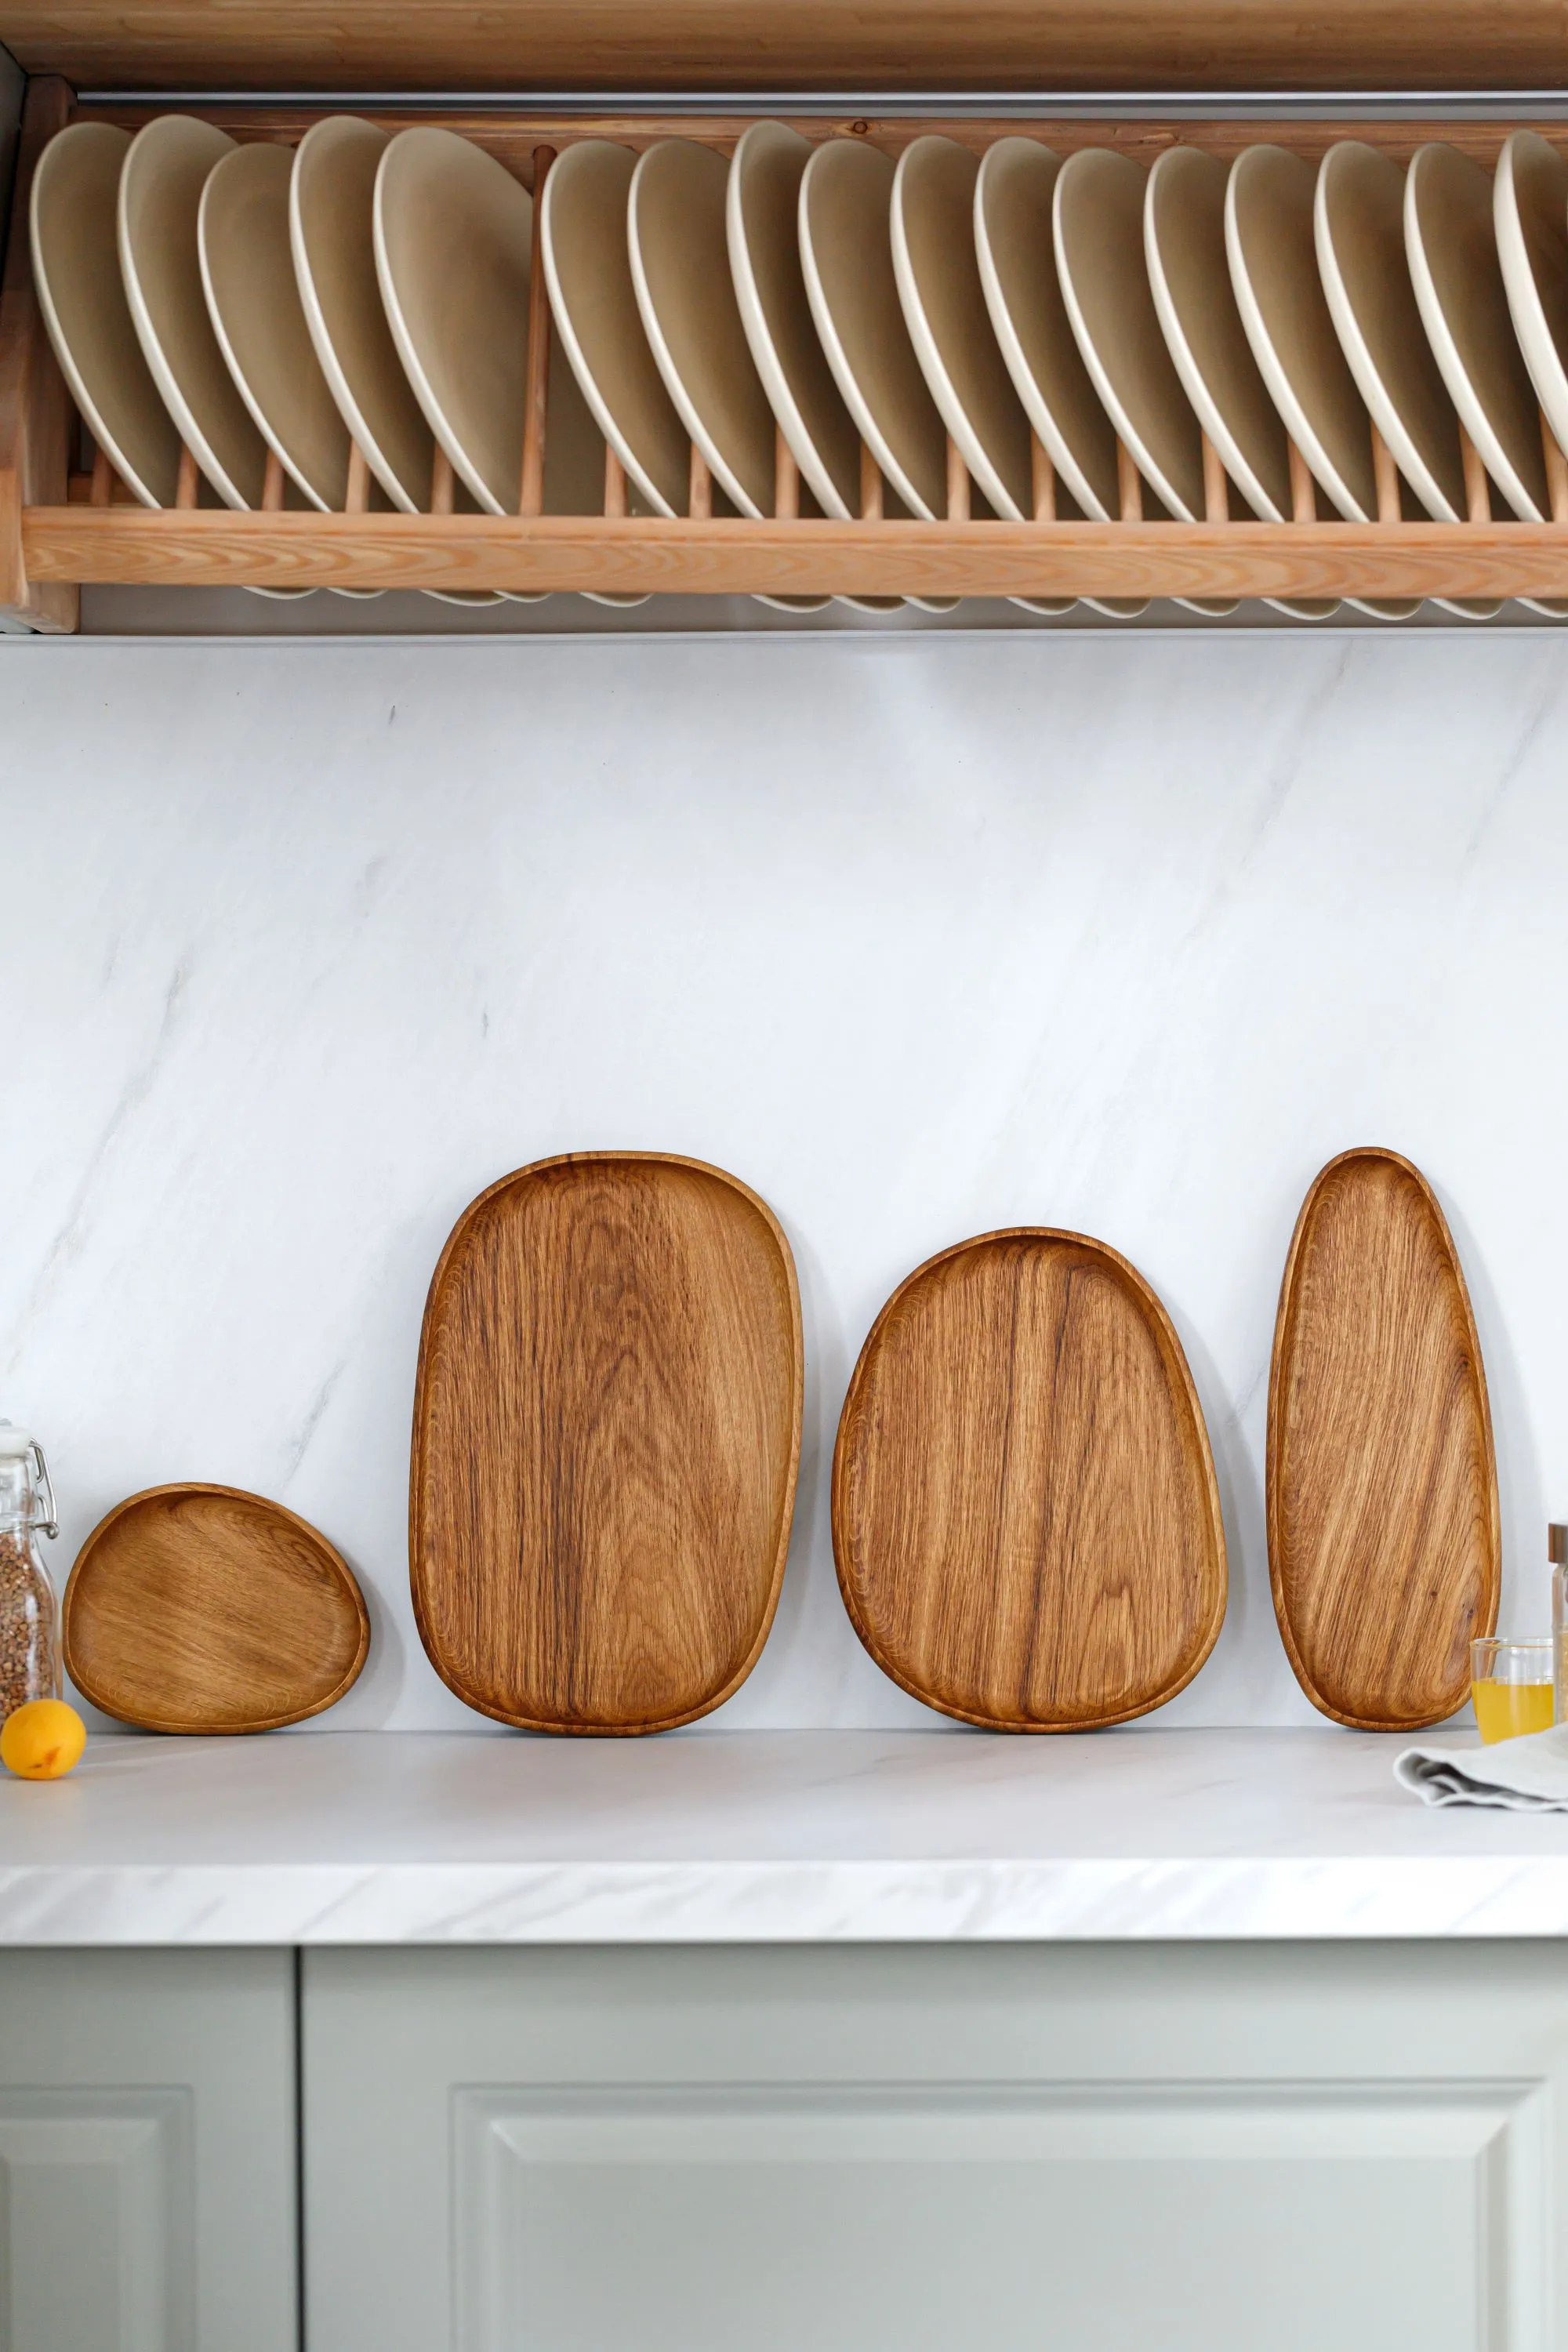 Tray dividers keep your kitchen items organized, and increase your storage space.